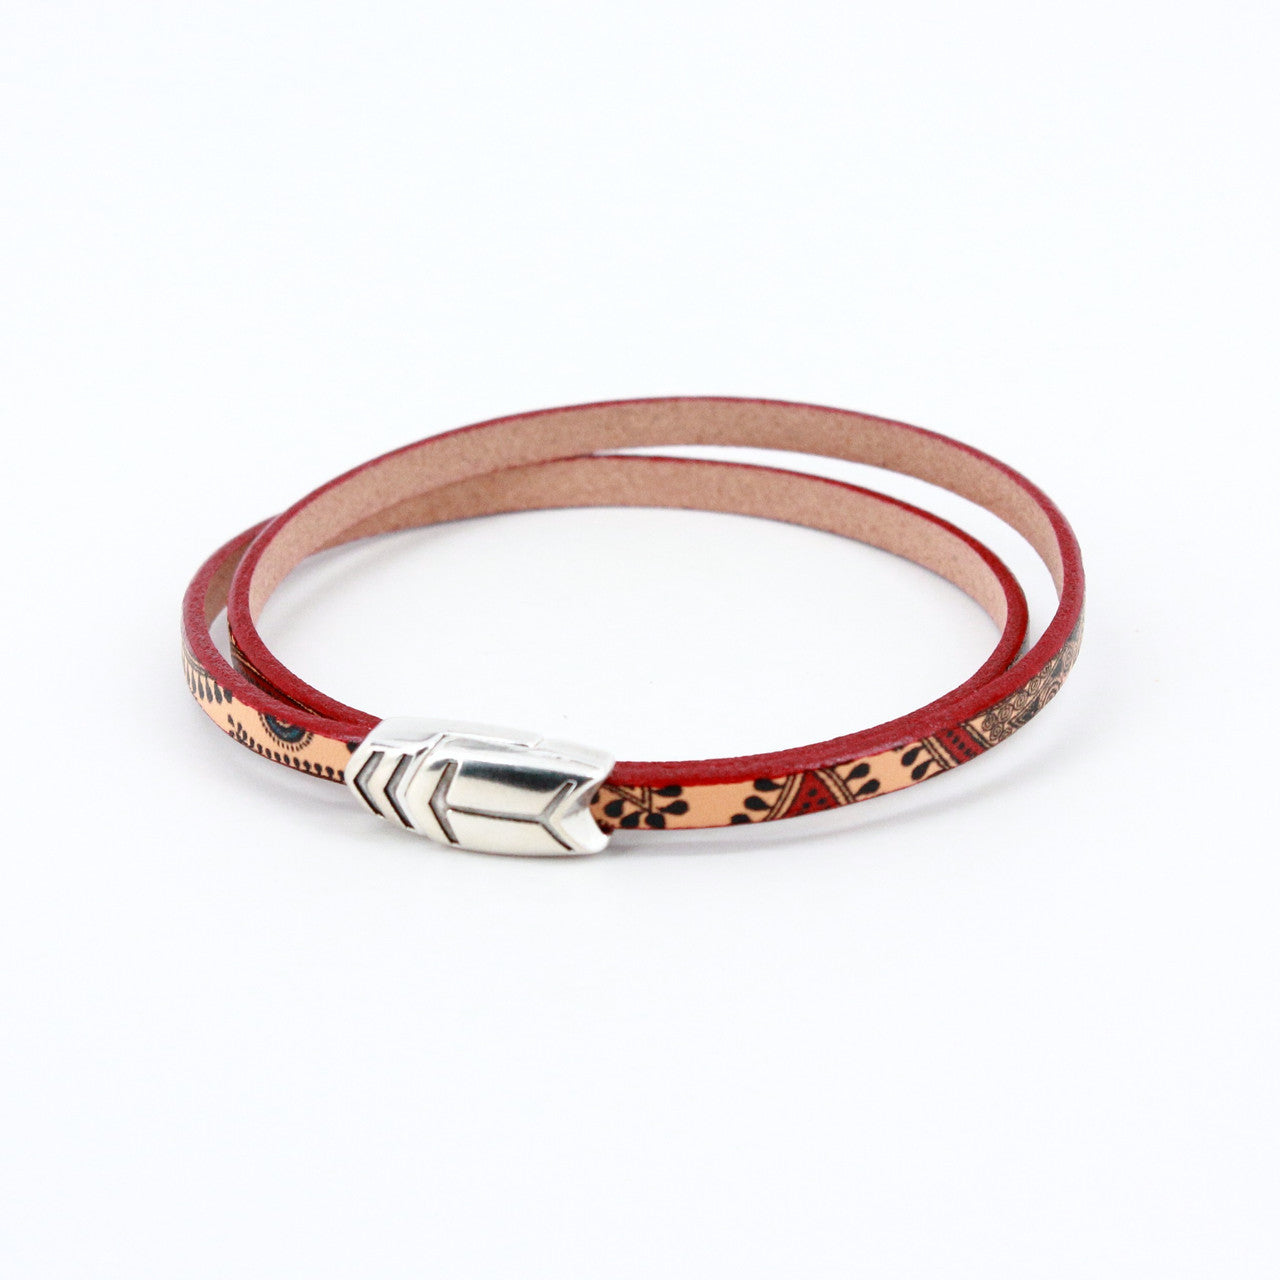 Painted Leather Paisley Bracelet with Silver Plate Arrow Closure by Torino Leather